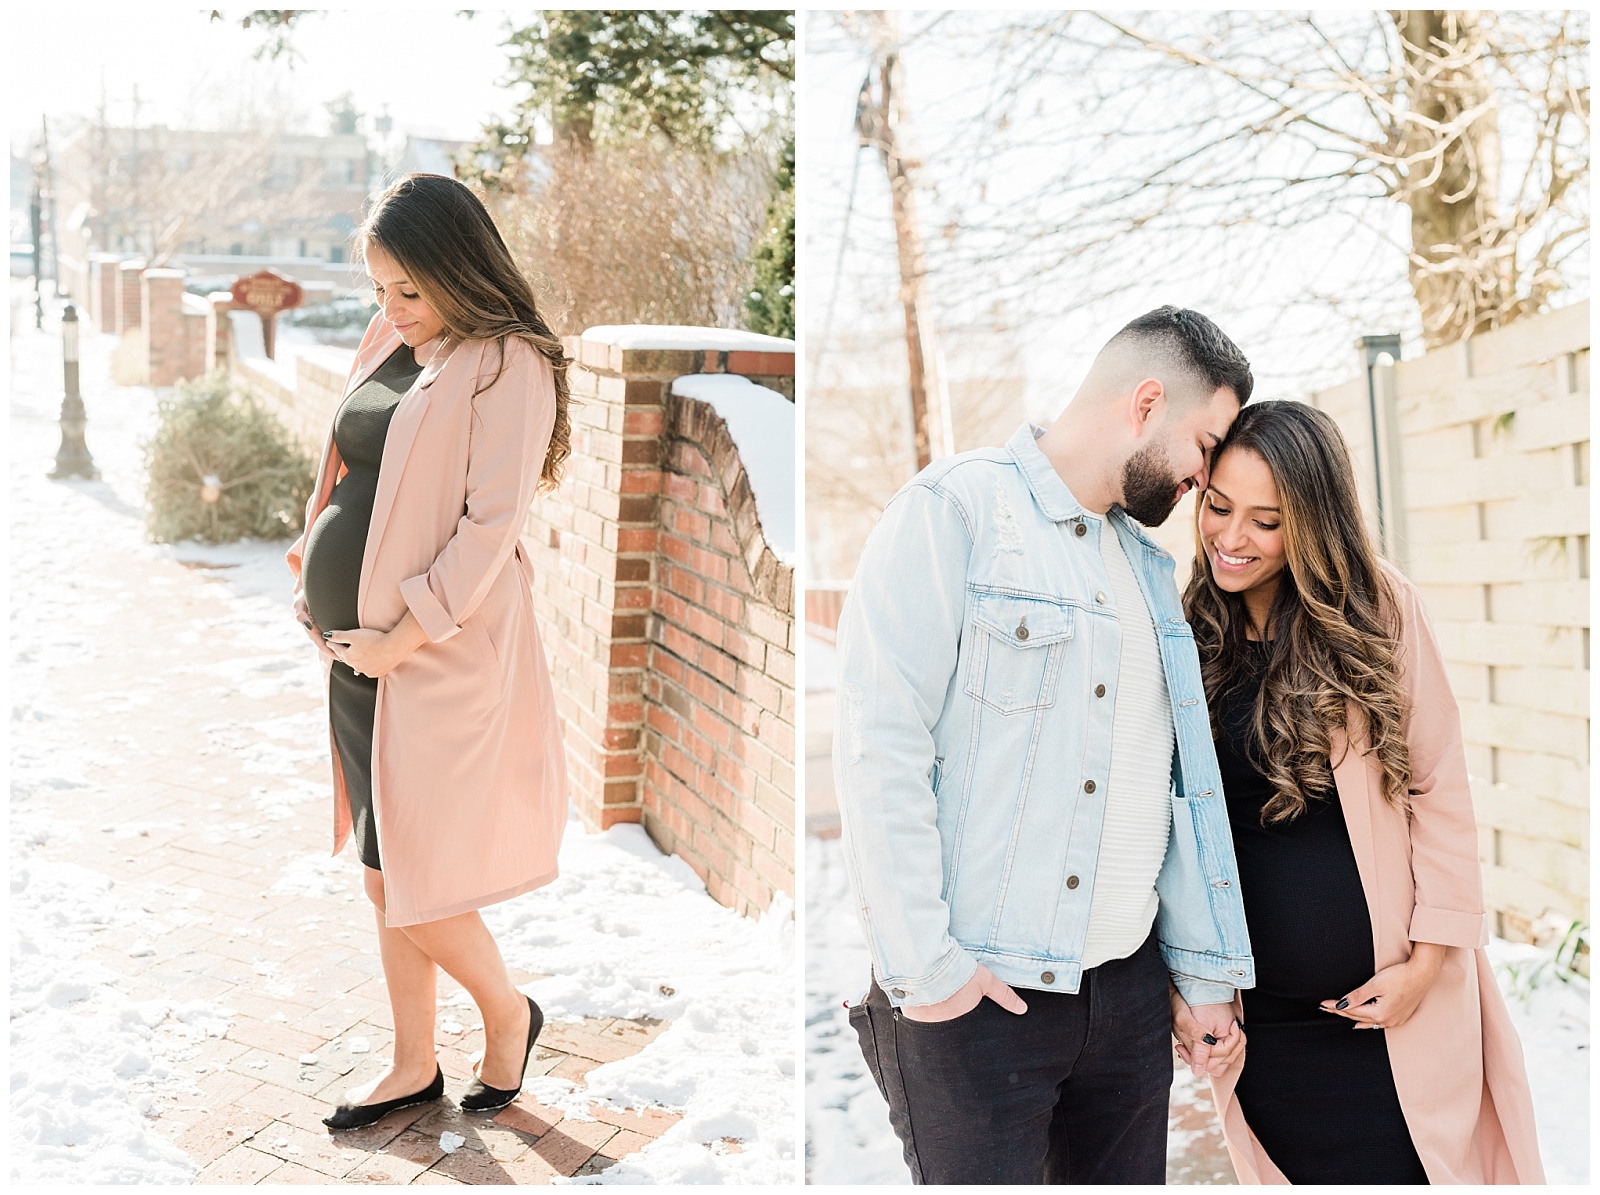 Maternity Session, Family, Baby, New Parents, Maternity Shoot, Pregnant, Pregnancy Photos, New Jersey, Photographer, Haddonfield, NJ, Haddon Heights, Town, Snowy, Winter, mama to be